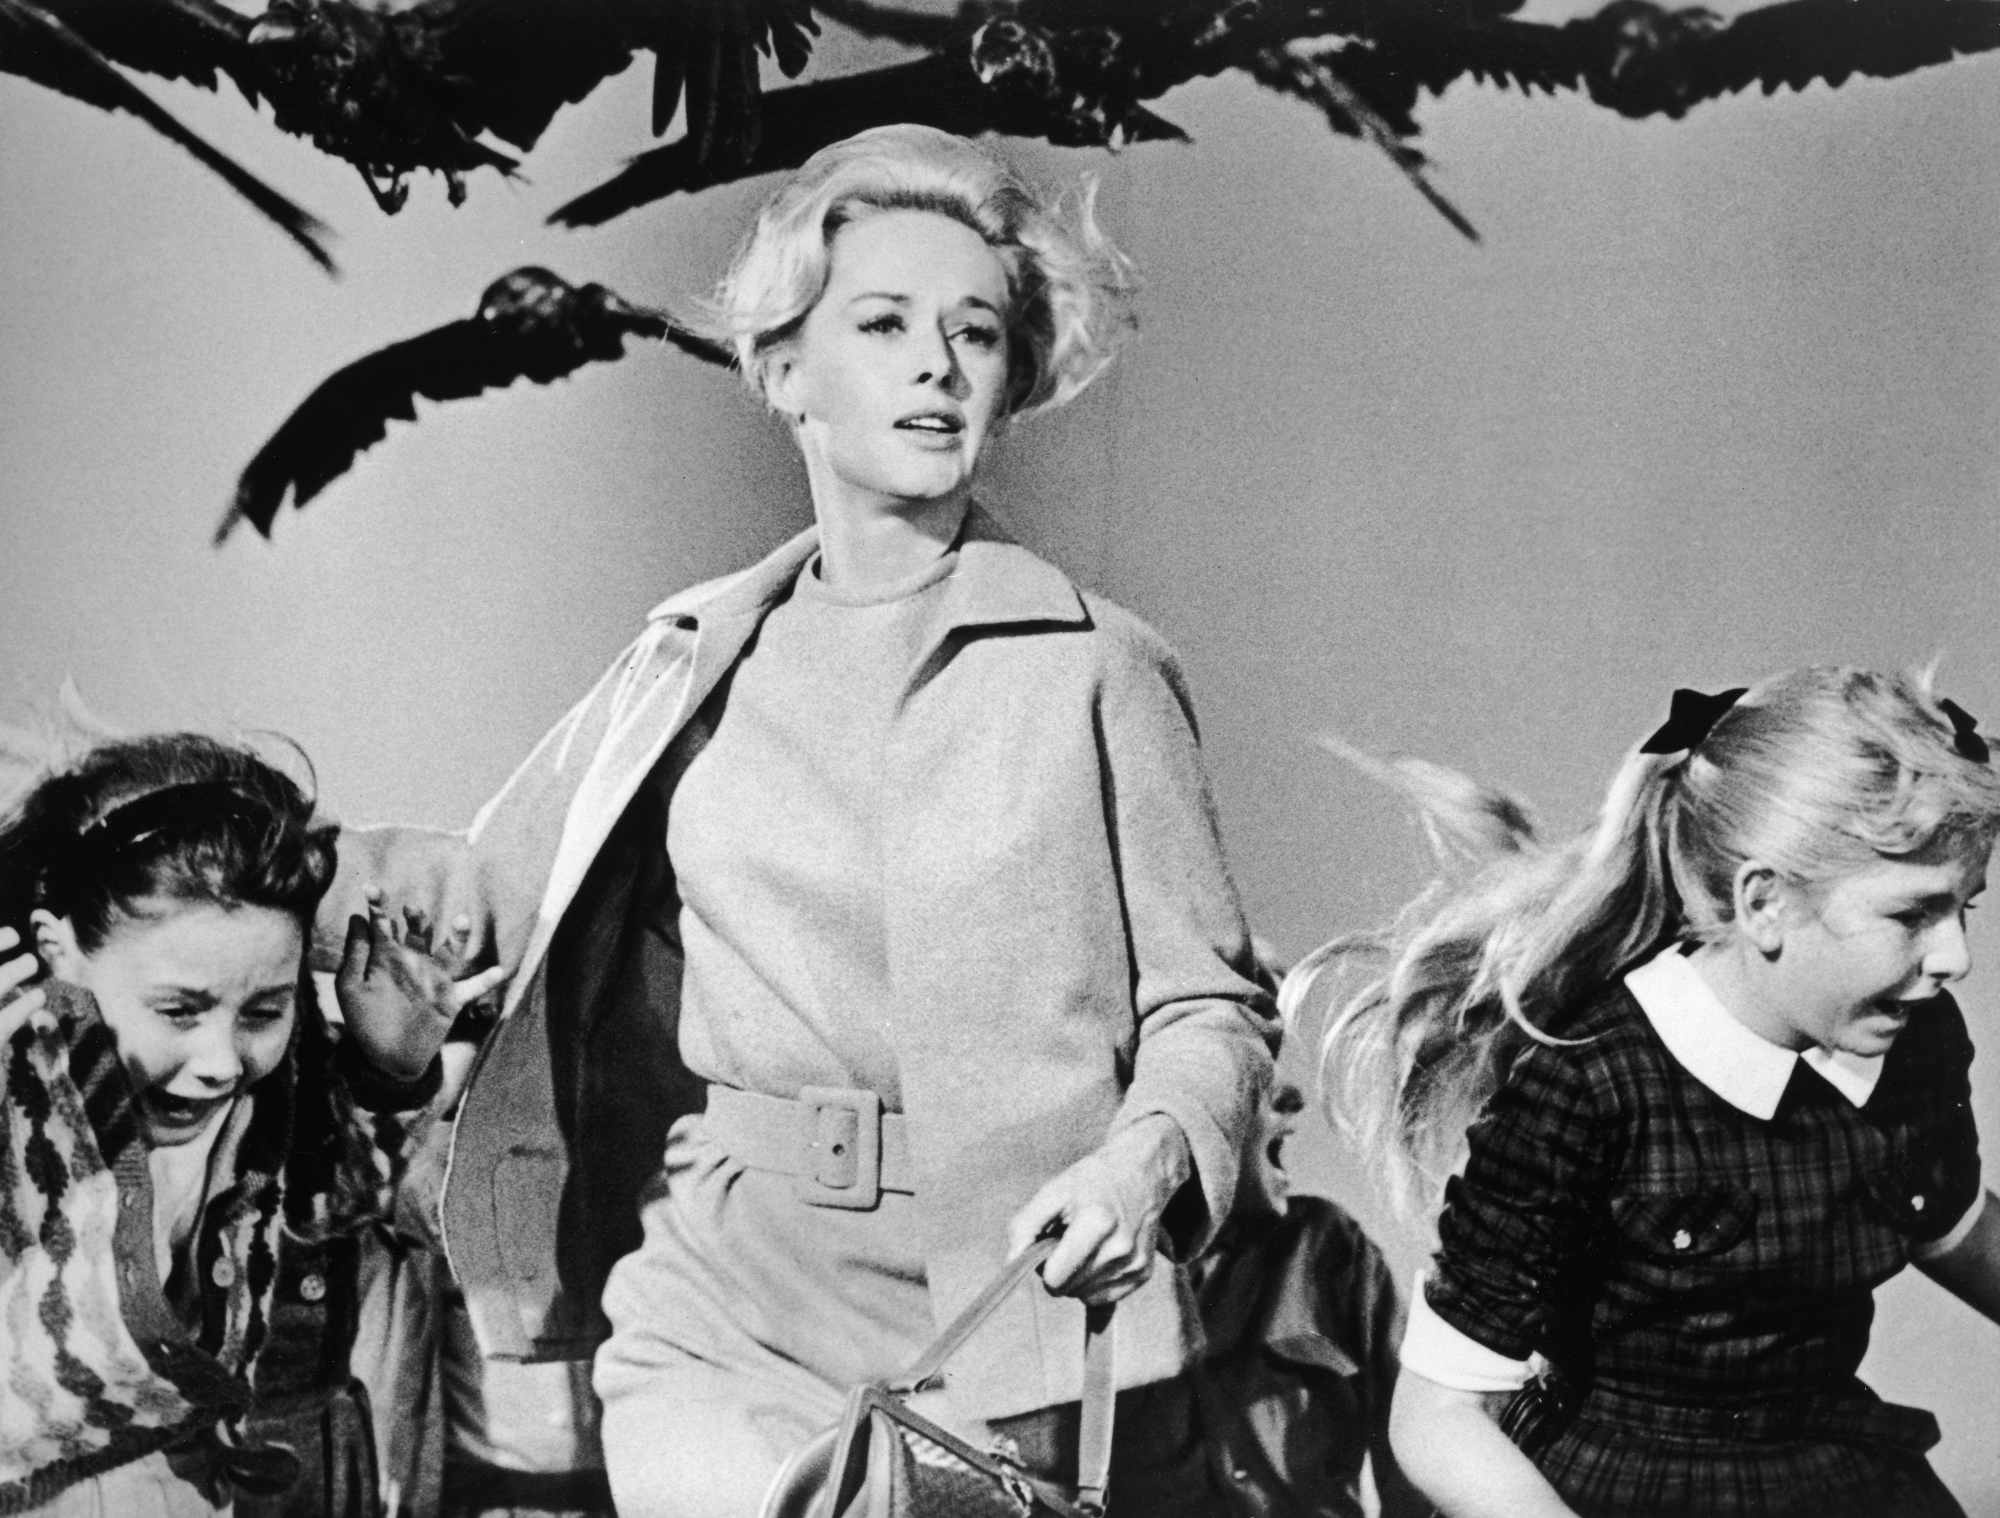 'The Birds' Tippi Hedren as Melanie Daniels in Alfred Hitchcock top 5. She's running from birds along with young children.